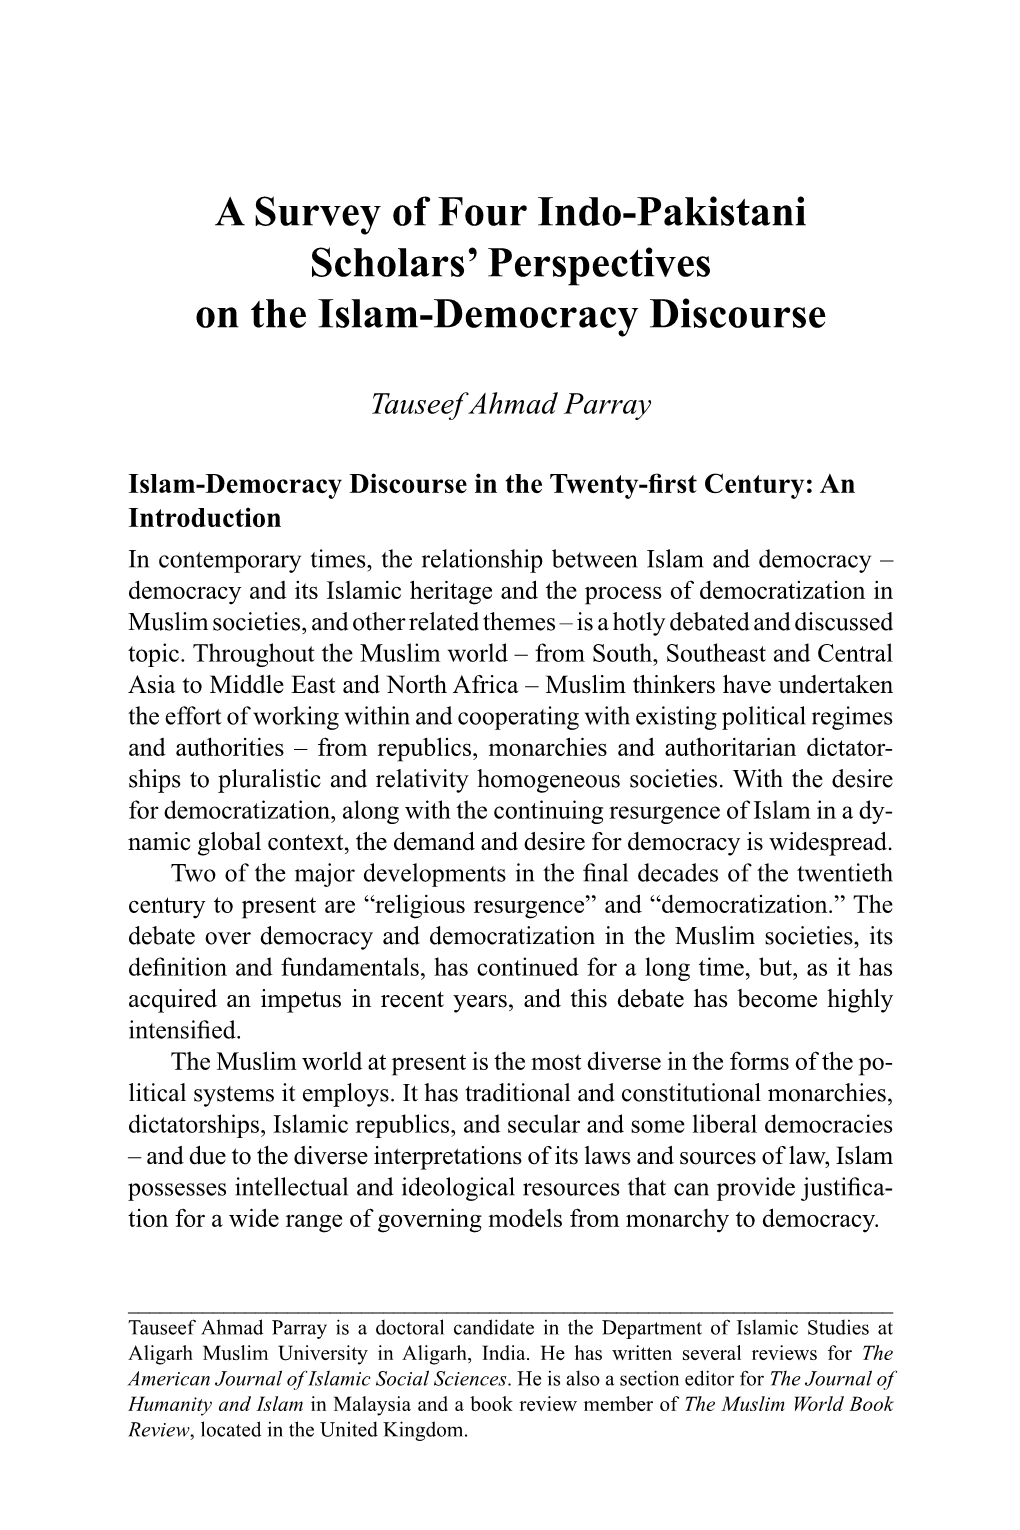 A Survey of Four Indo-Pakistani Scholars' Perspectives on the Islam